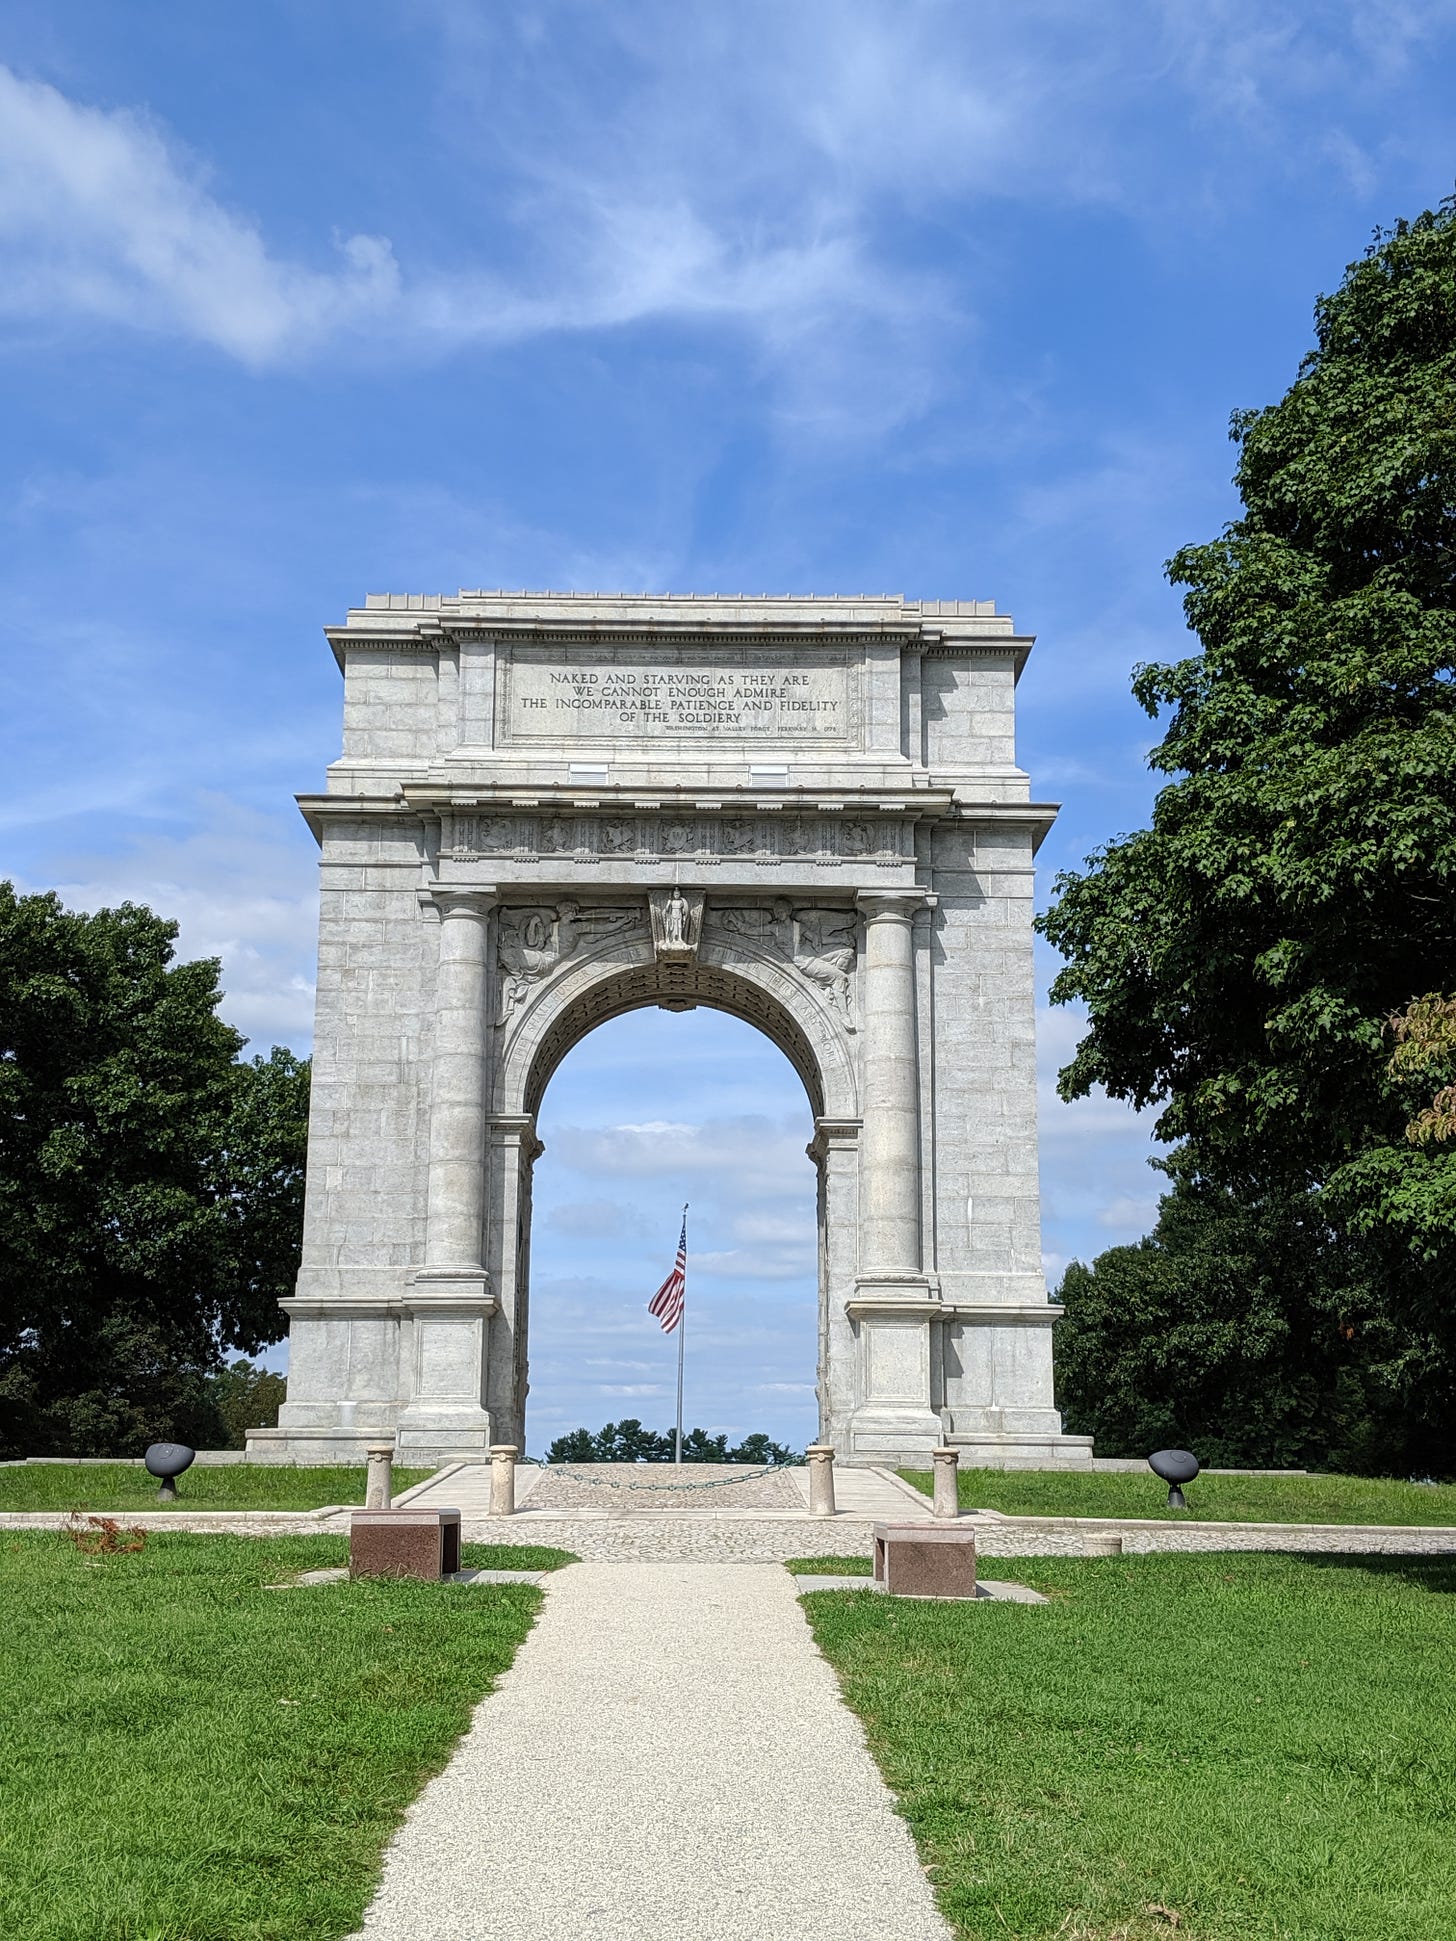 National Monument Arch at Valley Forge. A large stone arch rises against a blue sky. An American flag is visible through the arch.